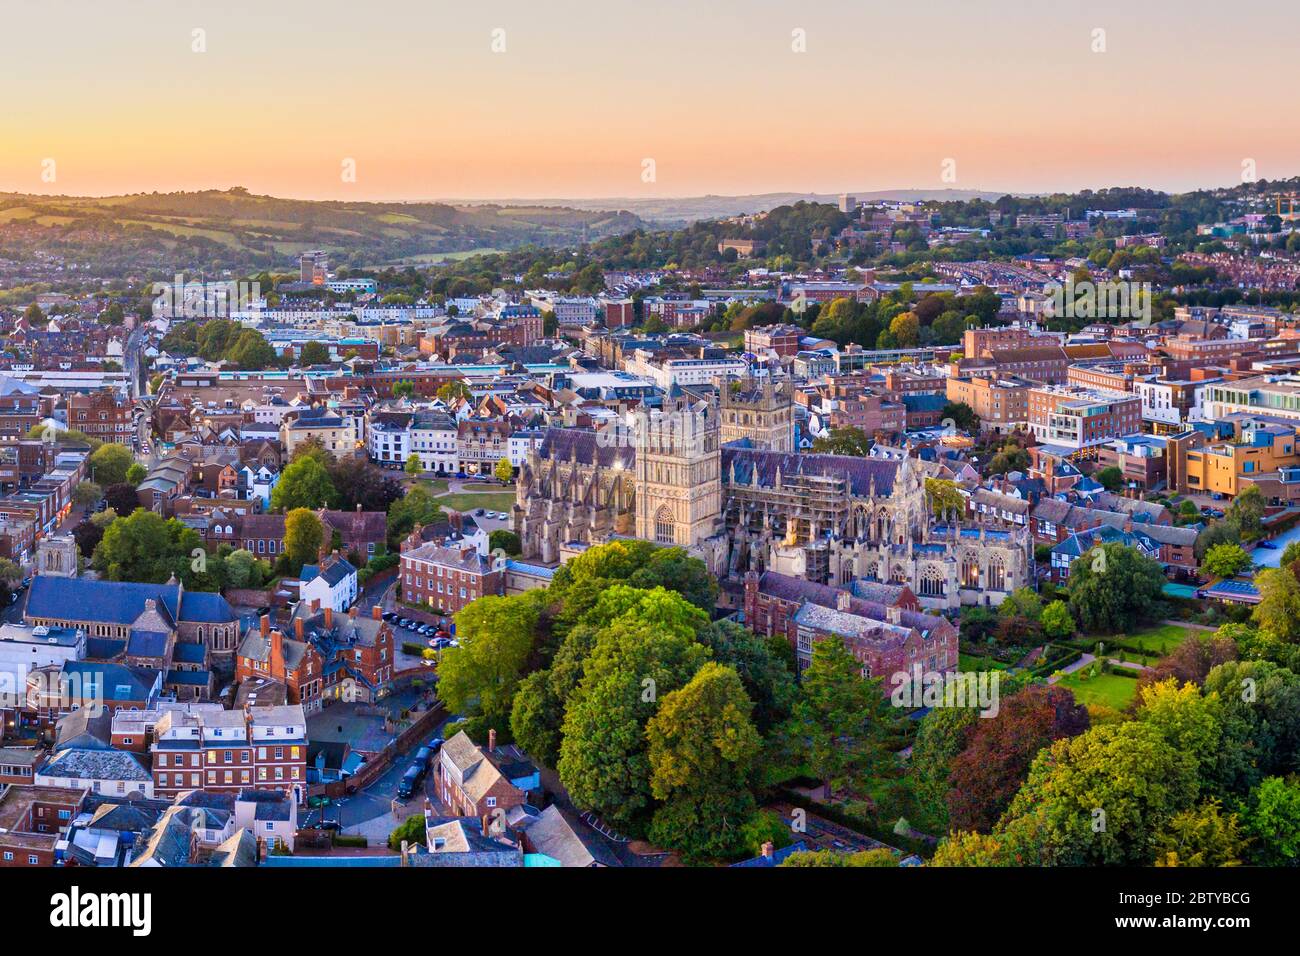 Aerial view over Exeter city centre and Exeter Cathedral, Exeter, Devon, England, United Kingdom, Europe Stock Photo